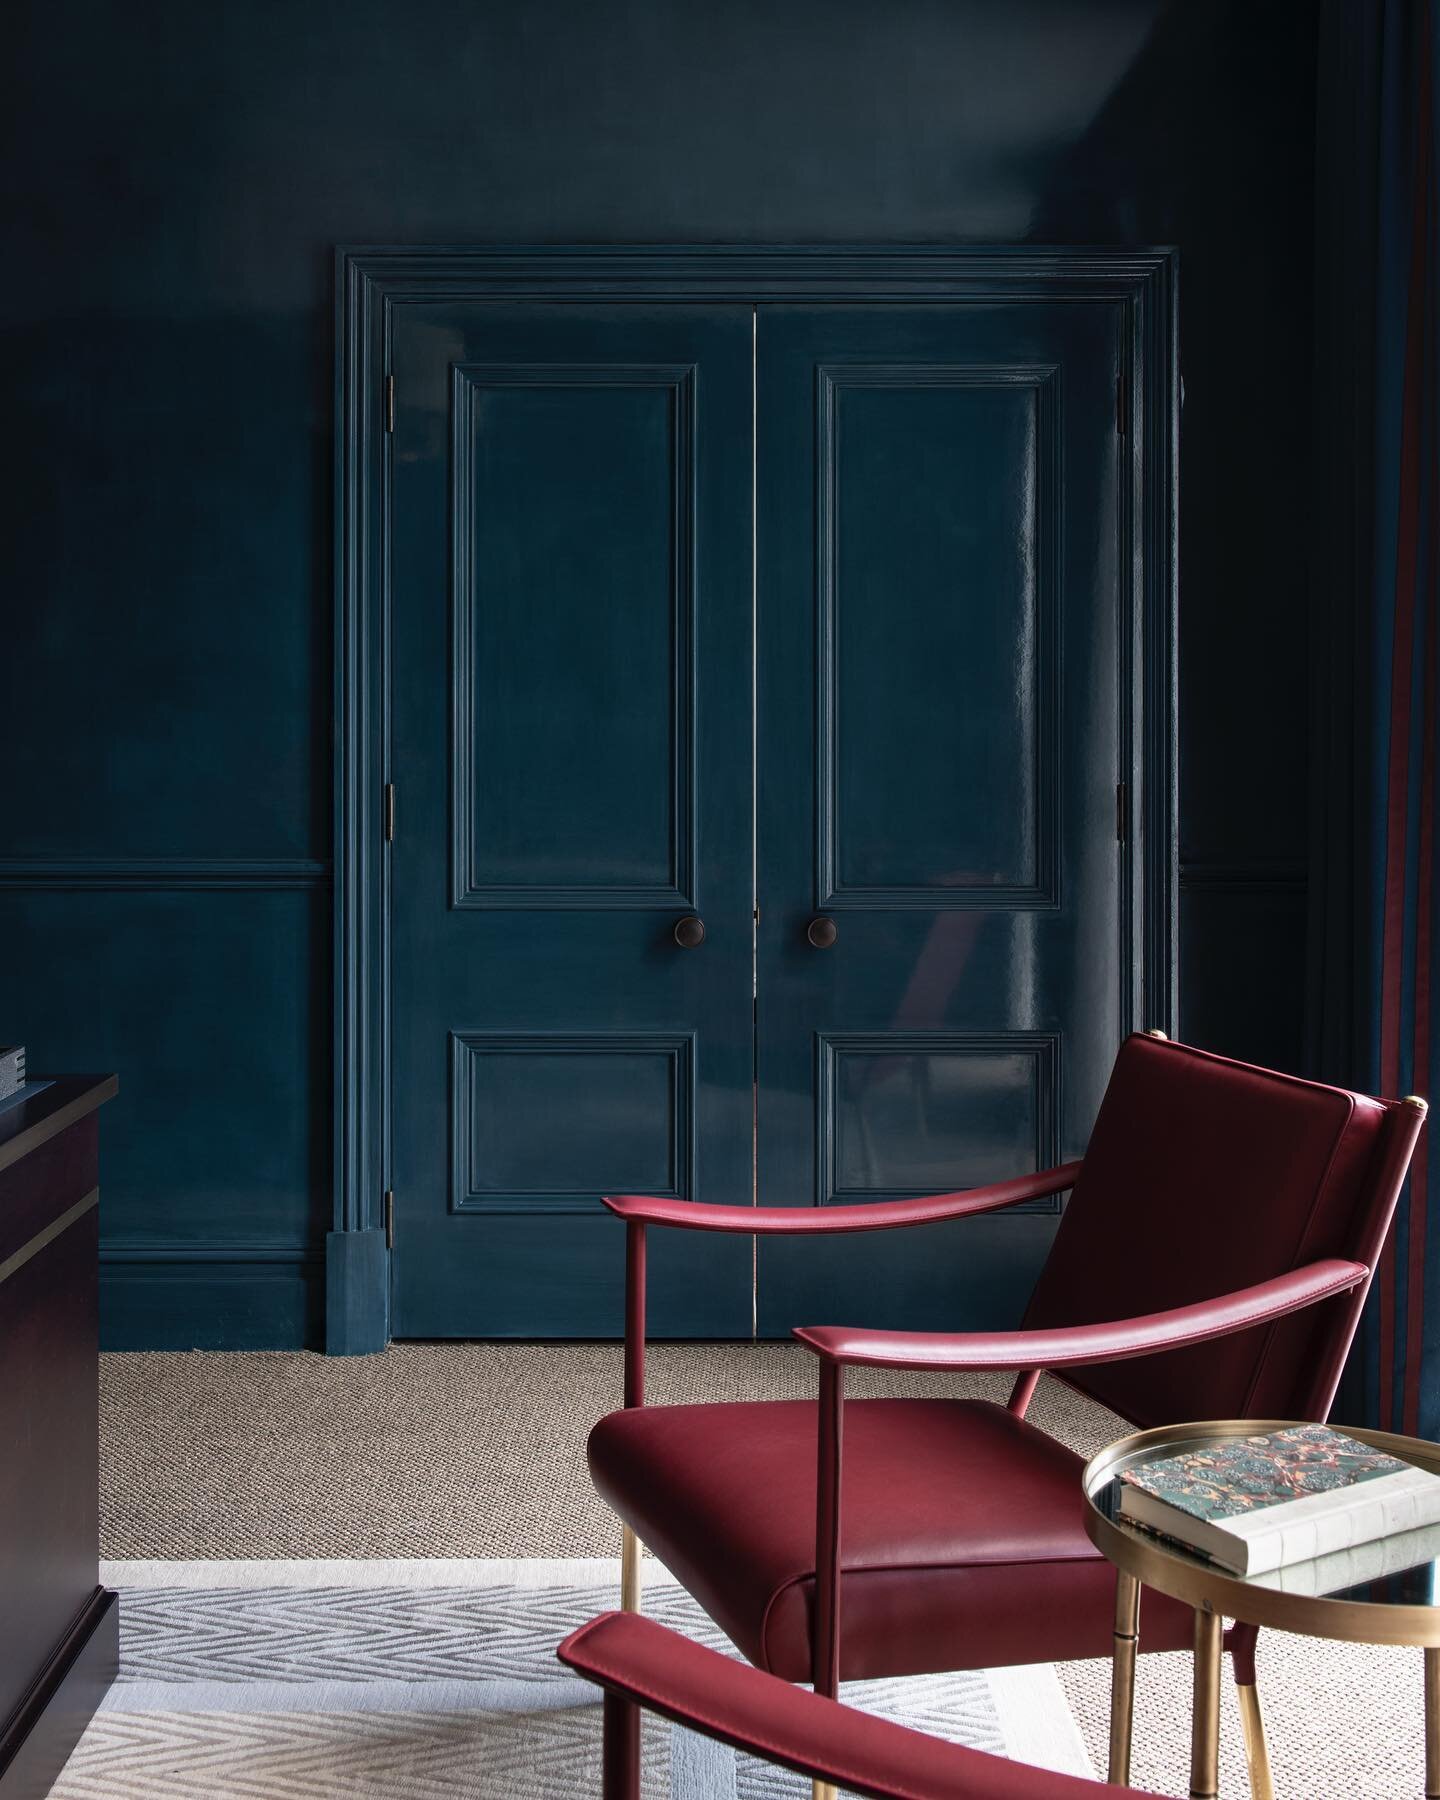 Decadently lacquered walls and woodwork contrast against a pared back textural sisal carpet in this home office. The process of applying this lacquer finish is intricate and takes hours upon hours of dedication from a specialist team, leaving a finis